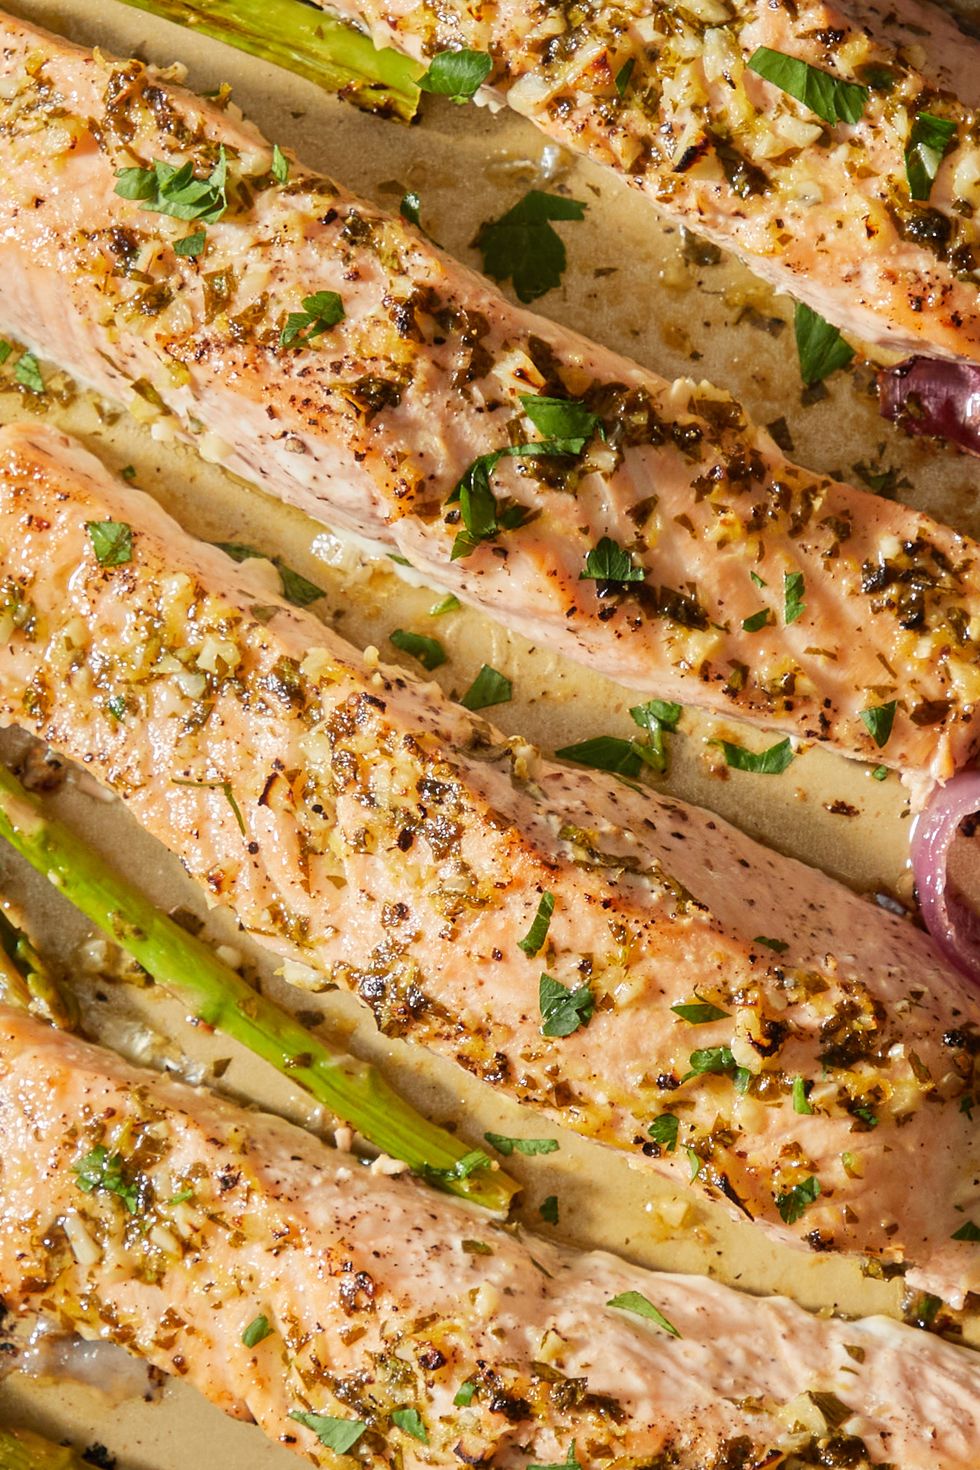 https://hips.hearstapps.com/hmg-prod/images/sheet-pan-garlic-butter-salmon-and-asparagus-lead-643d8162a7c4f.jpg?crop=0.6666666666666666xw:1xh;center,top&resize=980:*